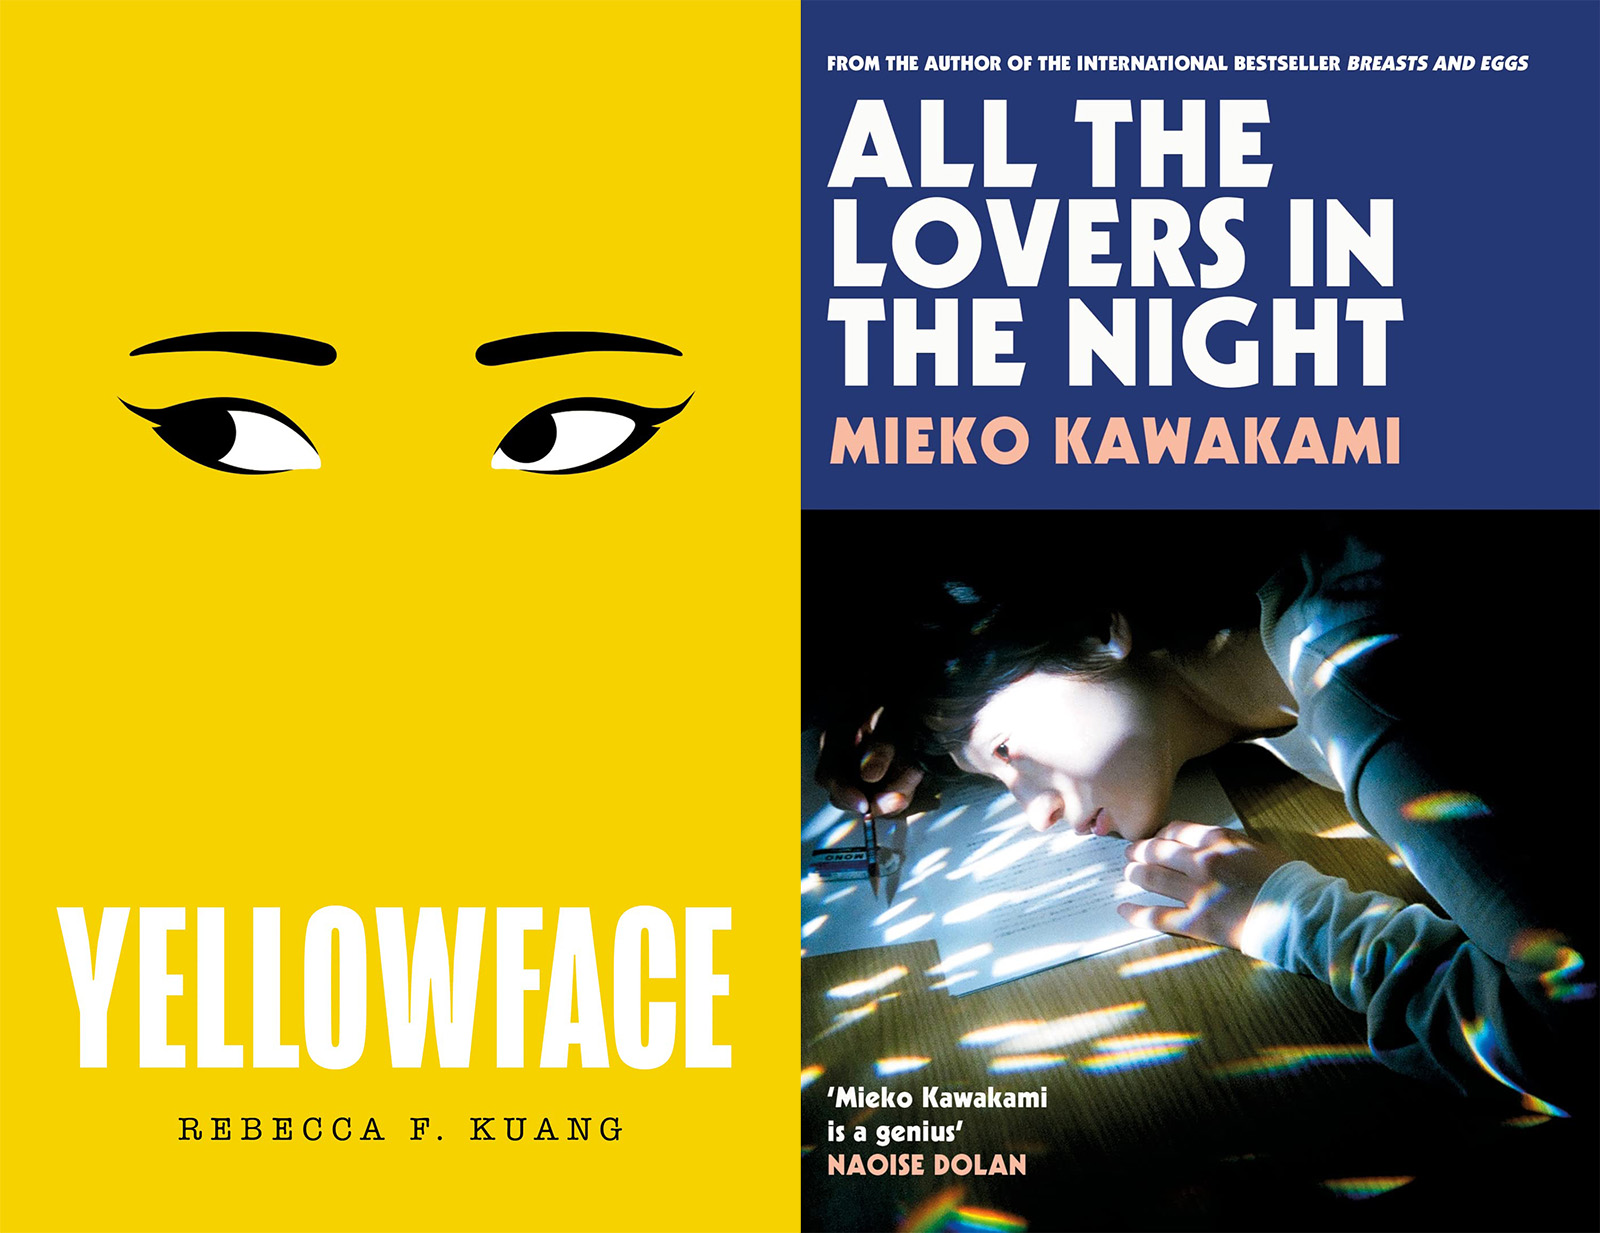 Yellowface and All The Lovers In The Night book covers